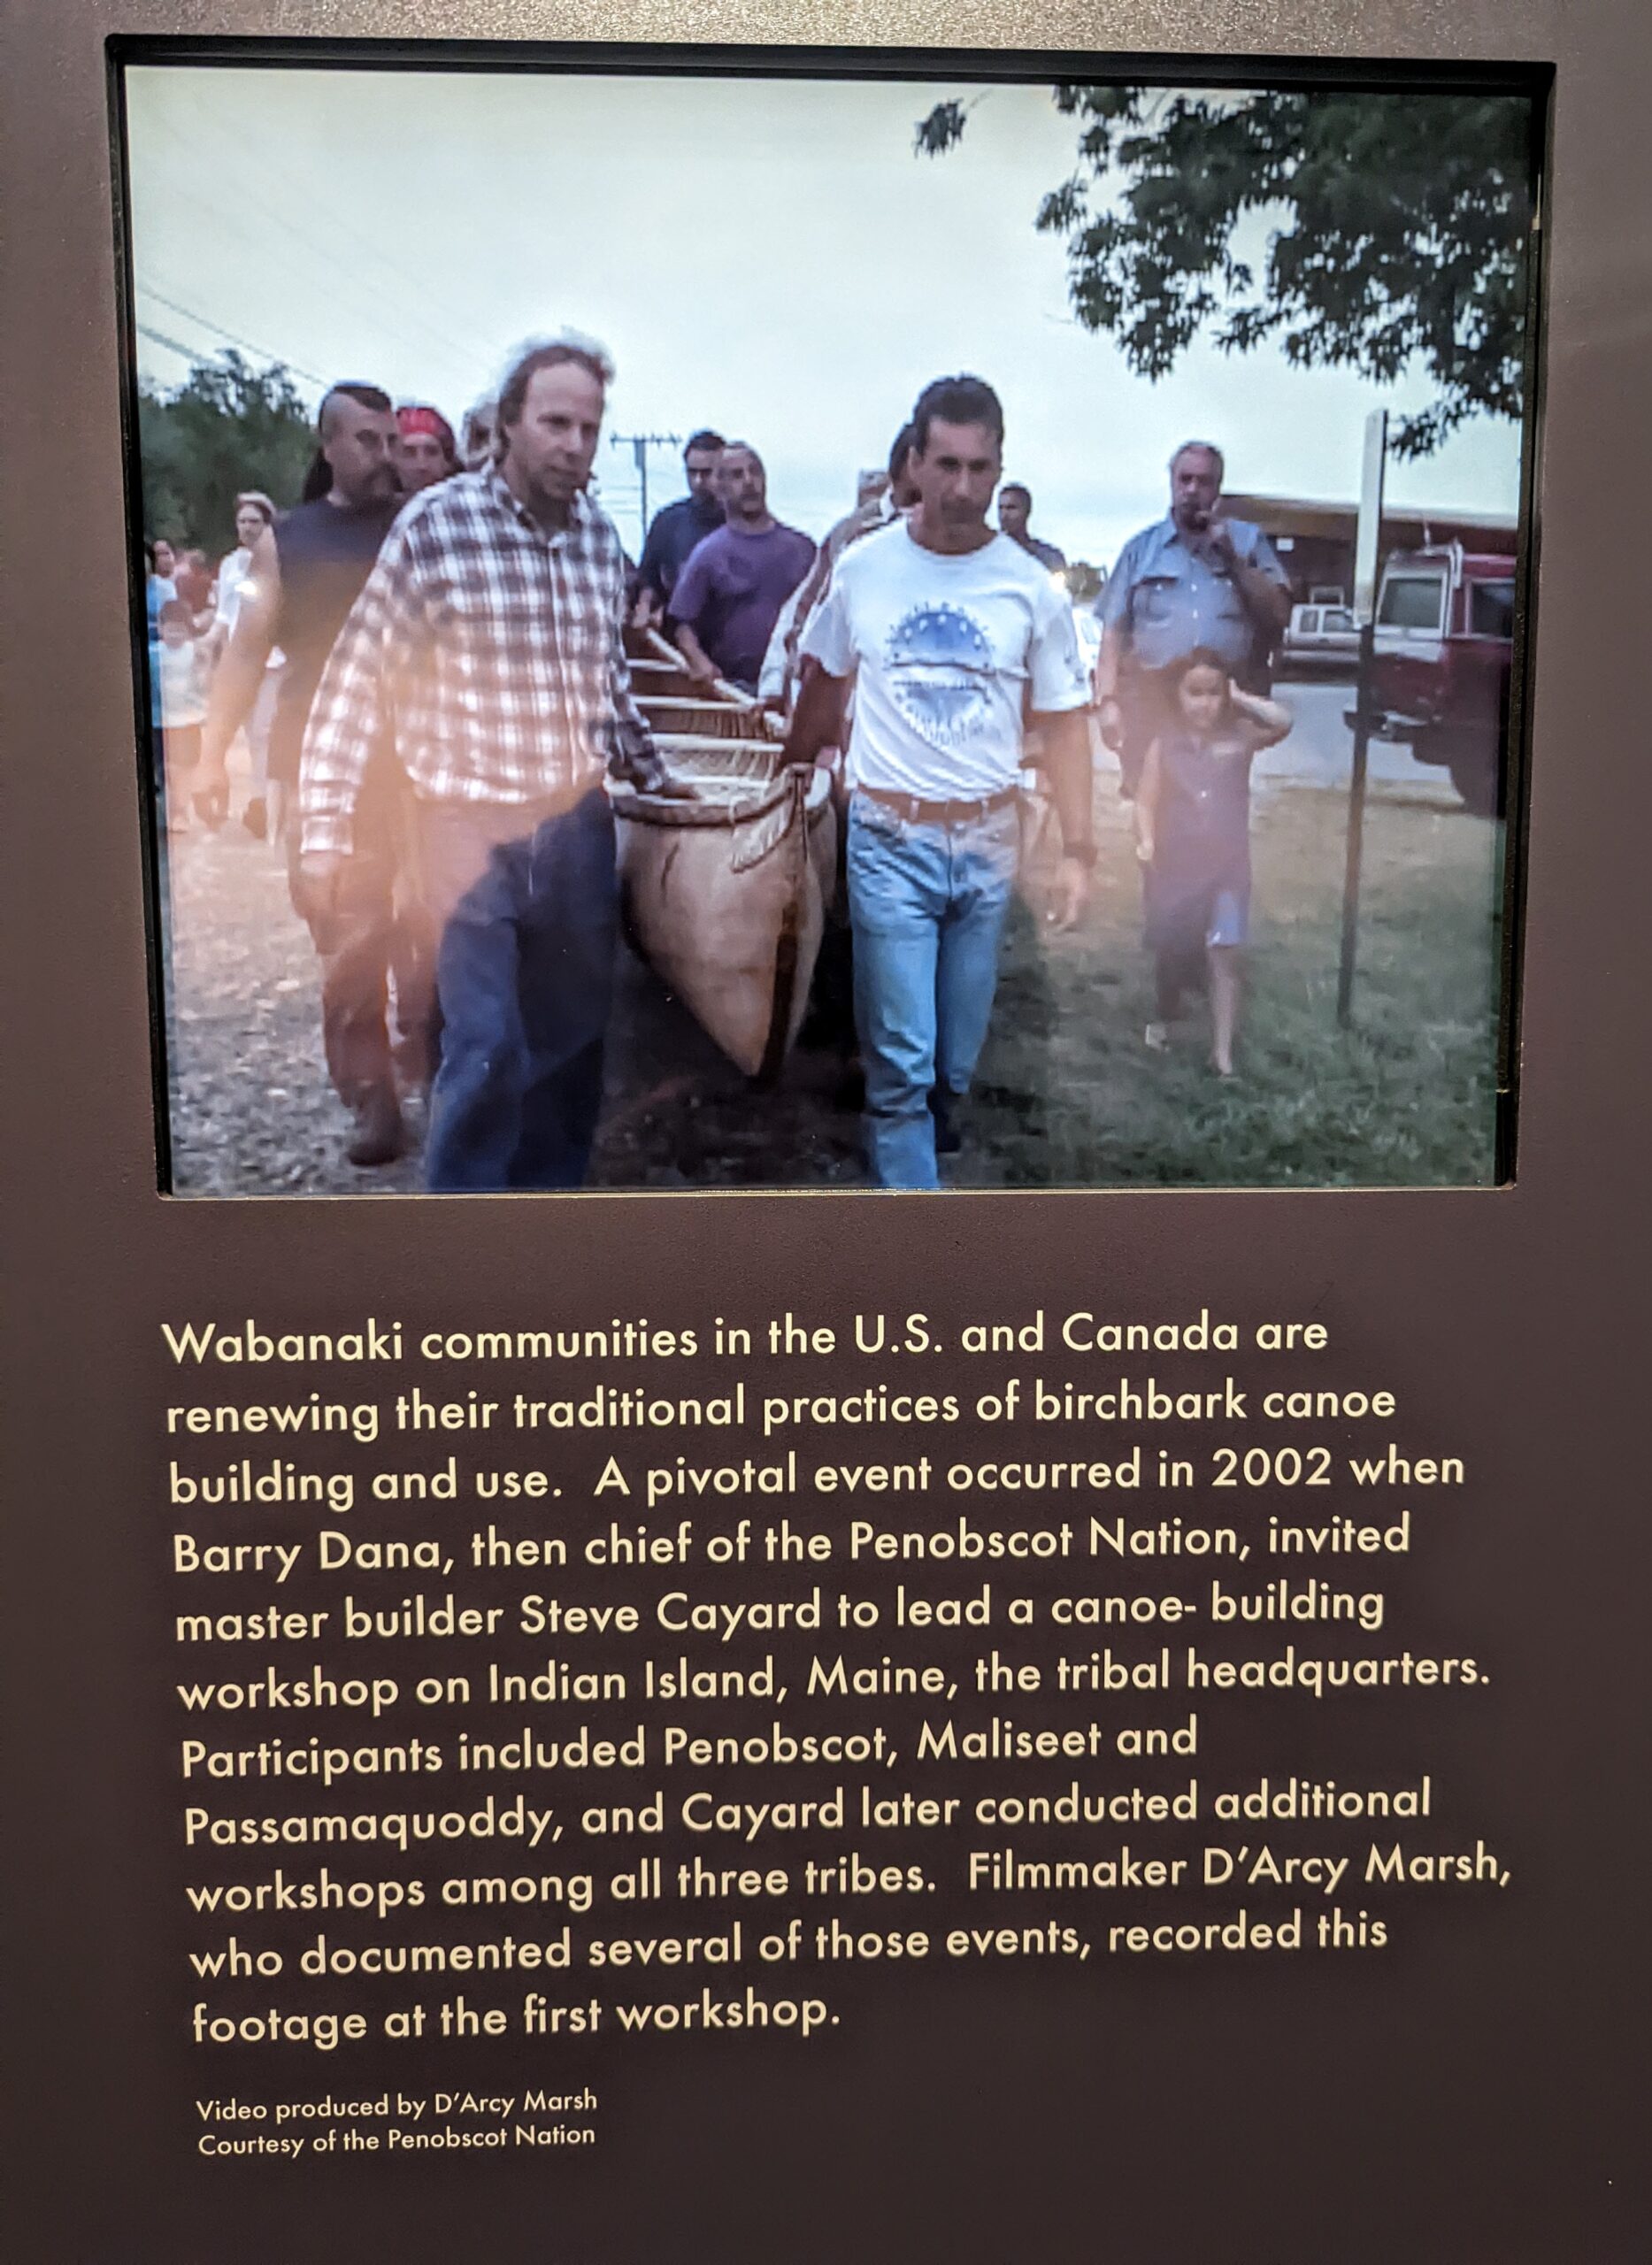 Museum text panel about Wabanaki canoe building, featuring photograph of several men carrying a canoe